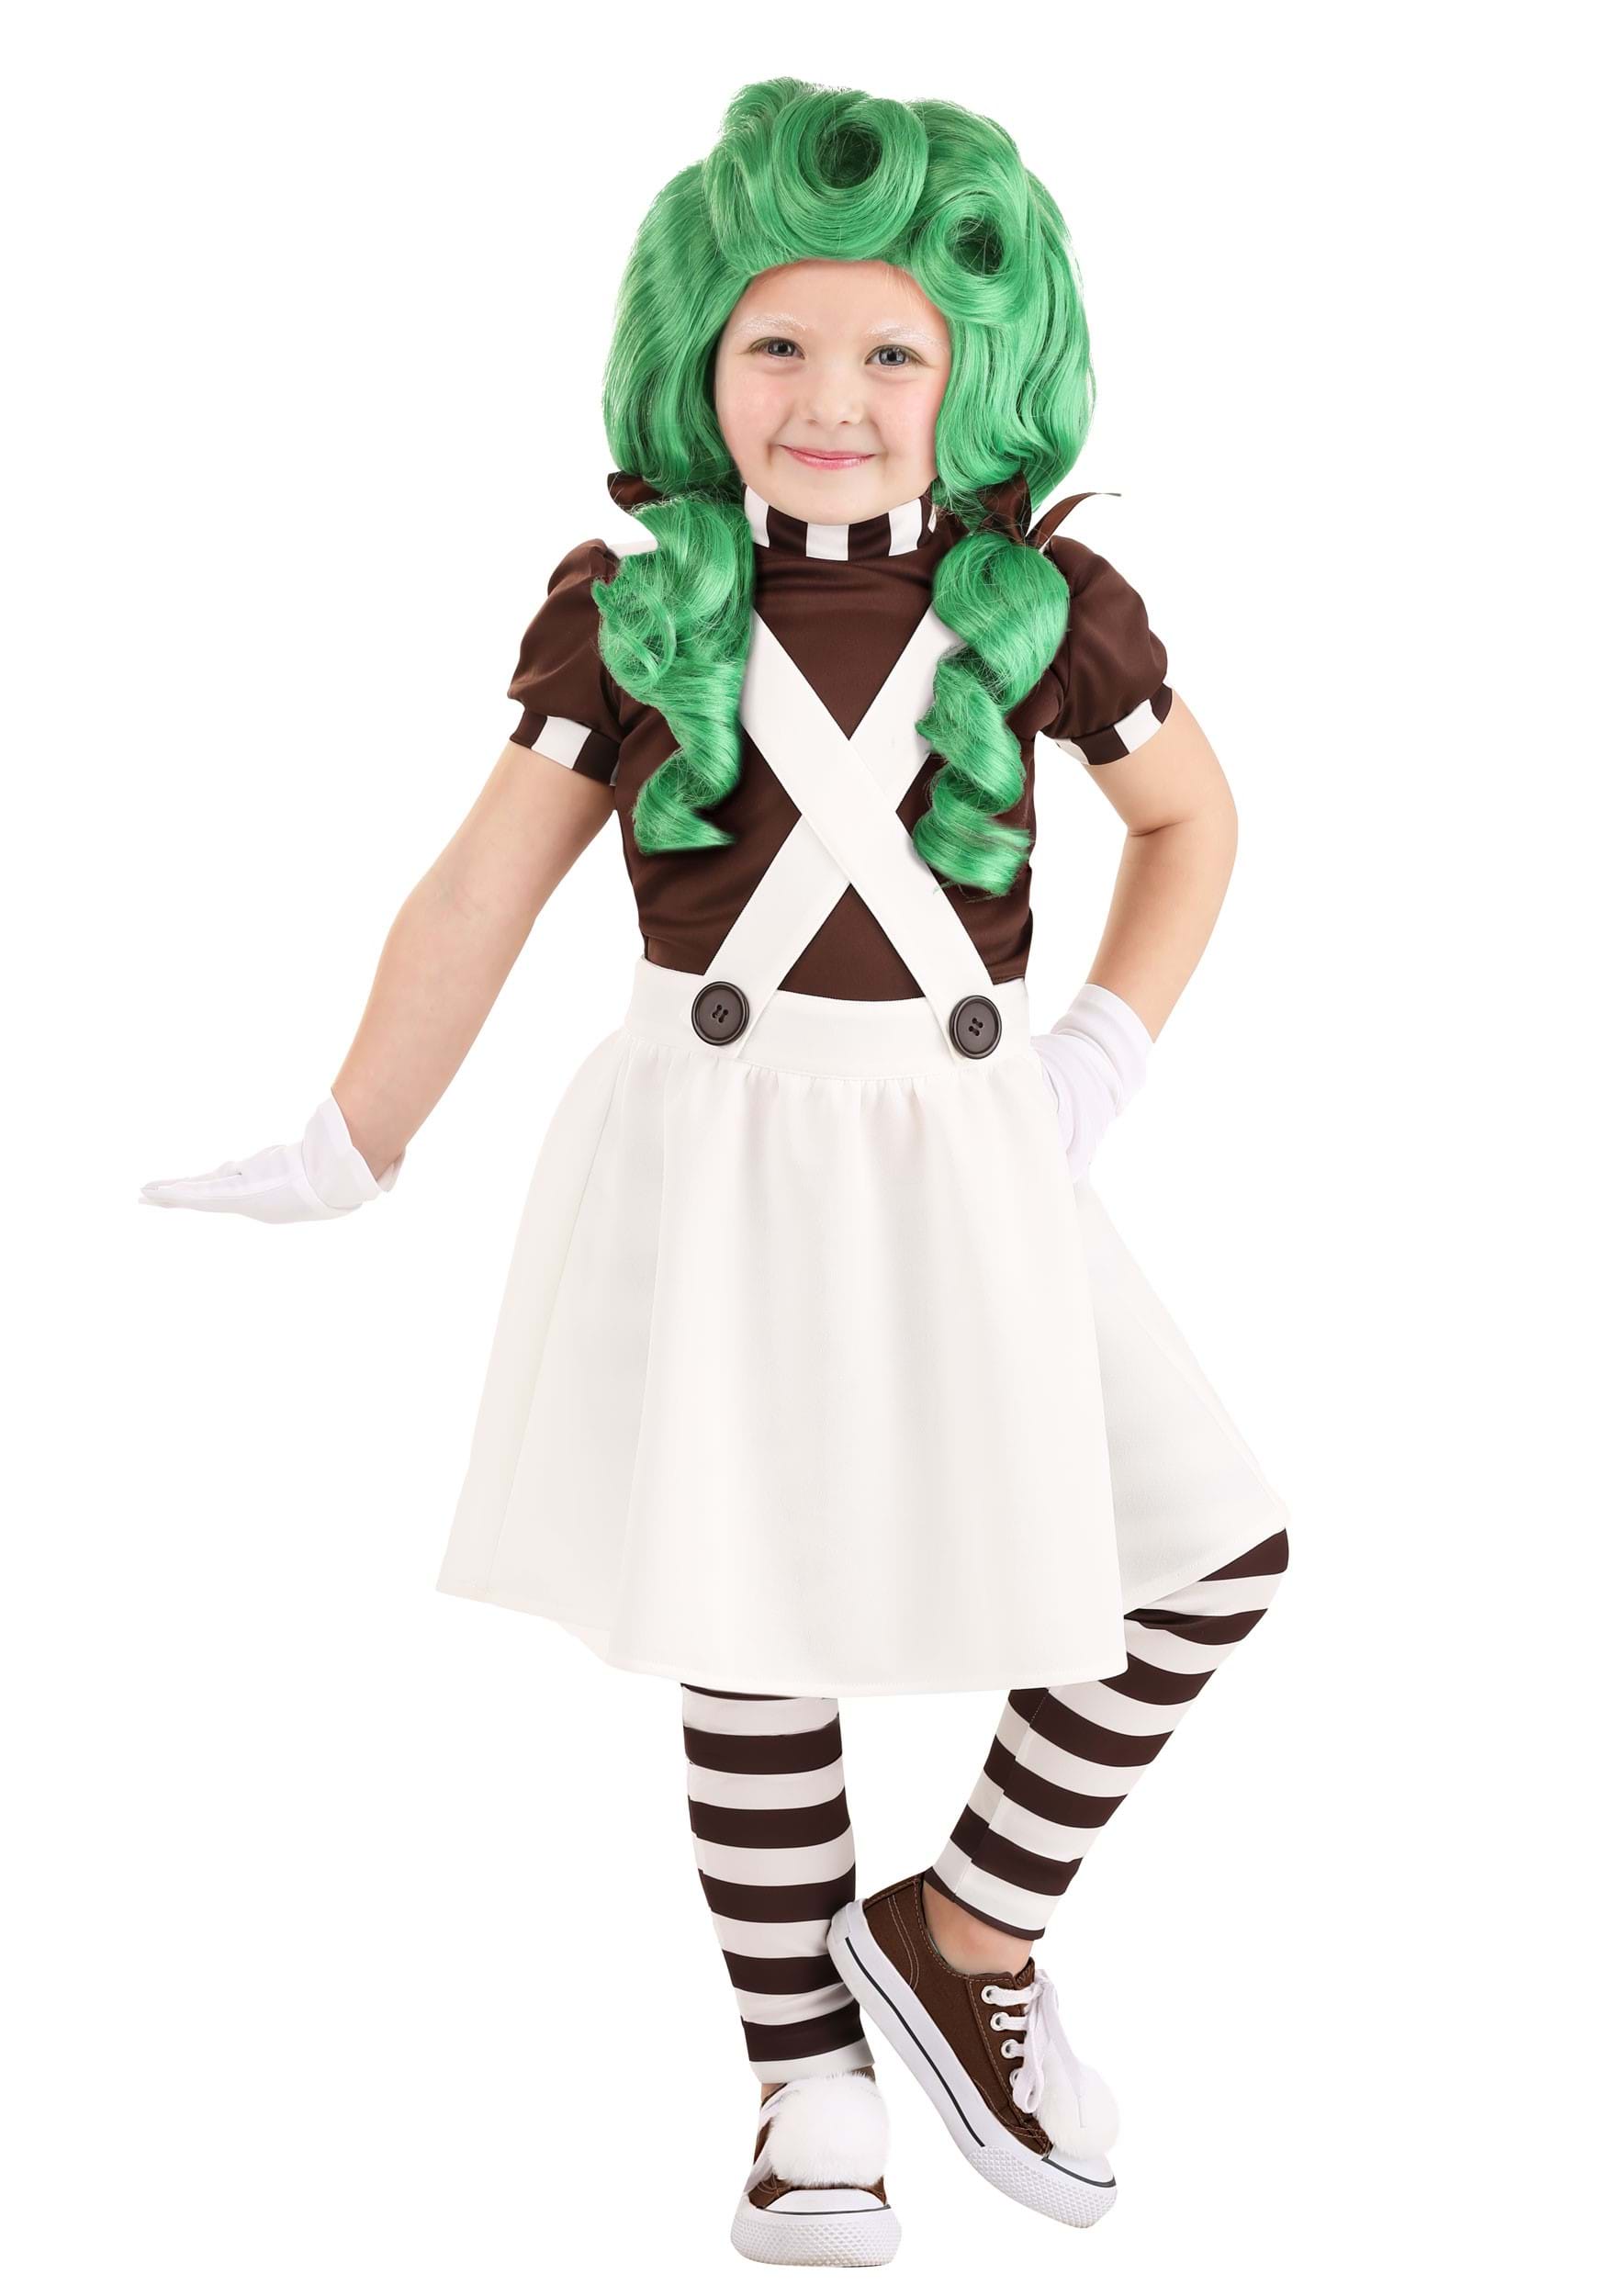 Photos - Fancy Dress Toddler FUN Costumes Girl's  Chocolate Factory Worker Costume Brown/Whi 